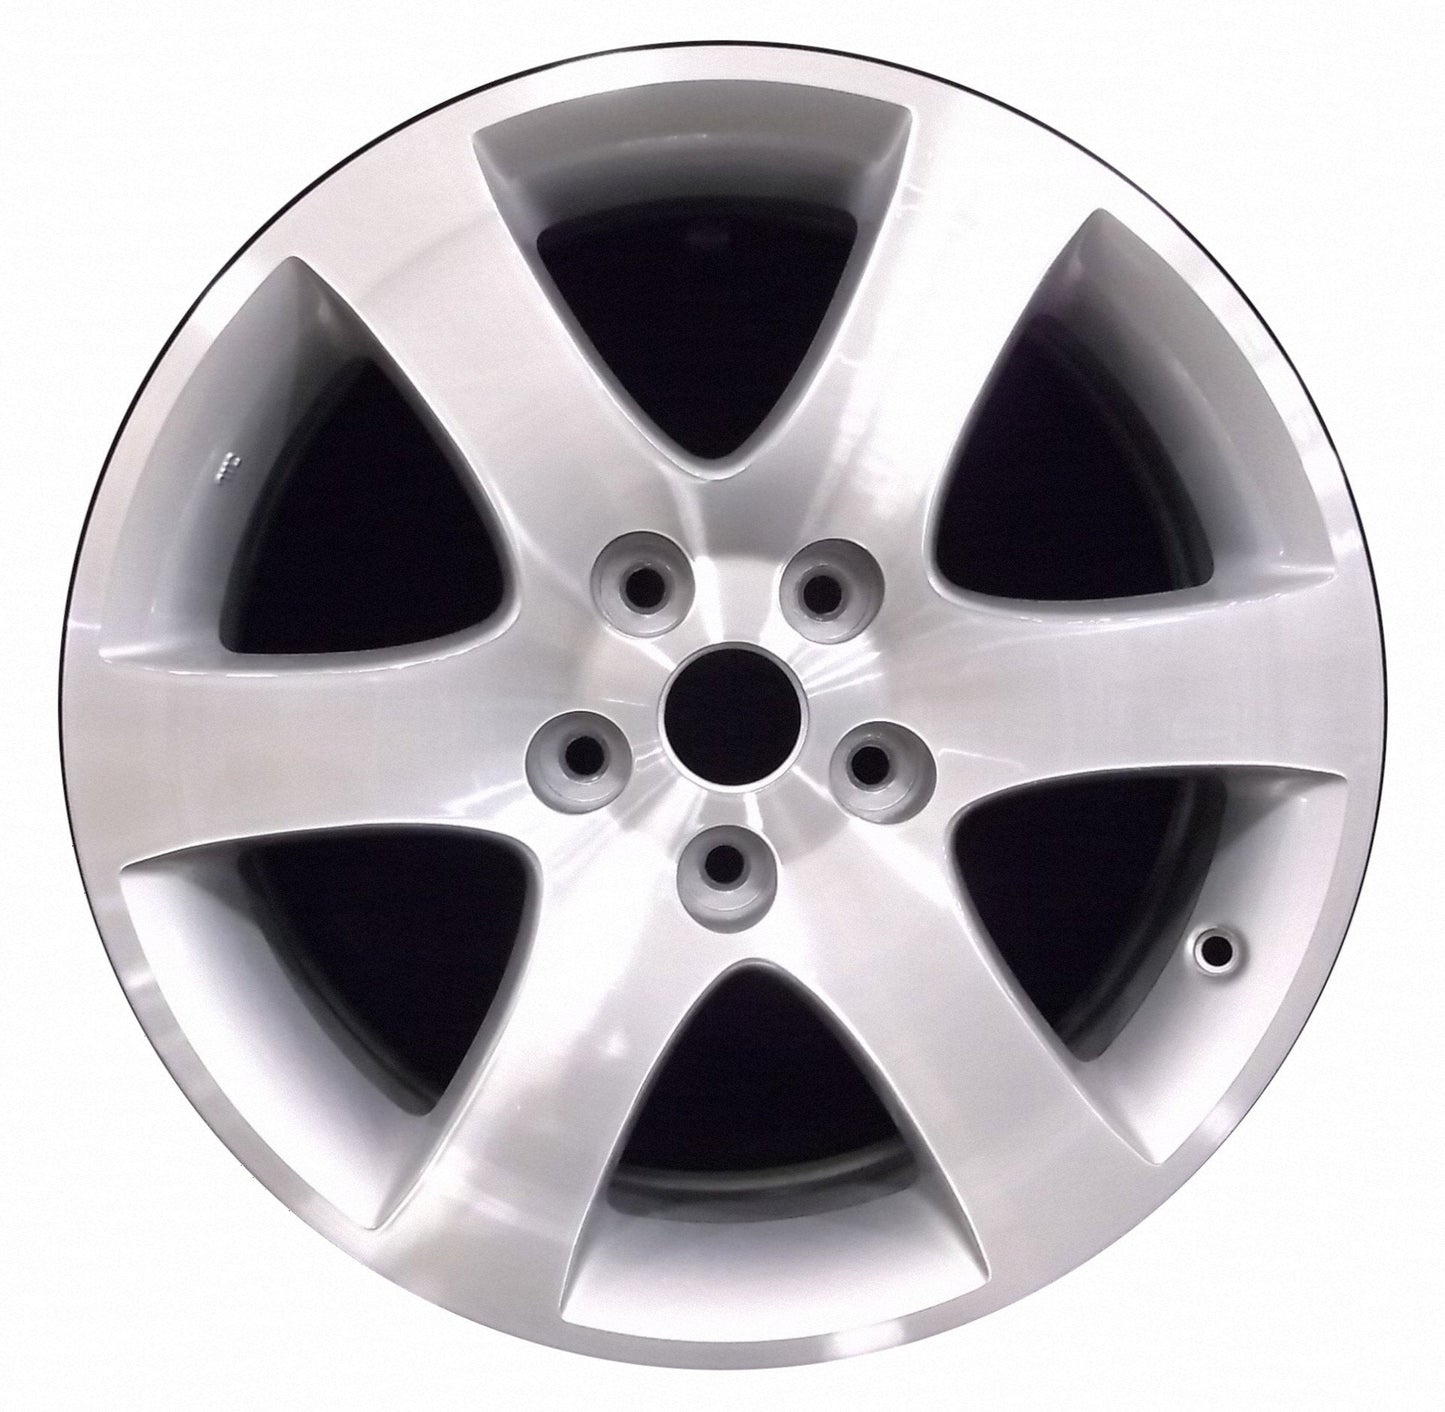 Nissan Quest  2007, 2008, 2009 Factory OEM Car Wheel Size 17x6.5 Alloy WAO.62477.PS07.MA